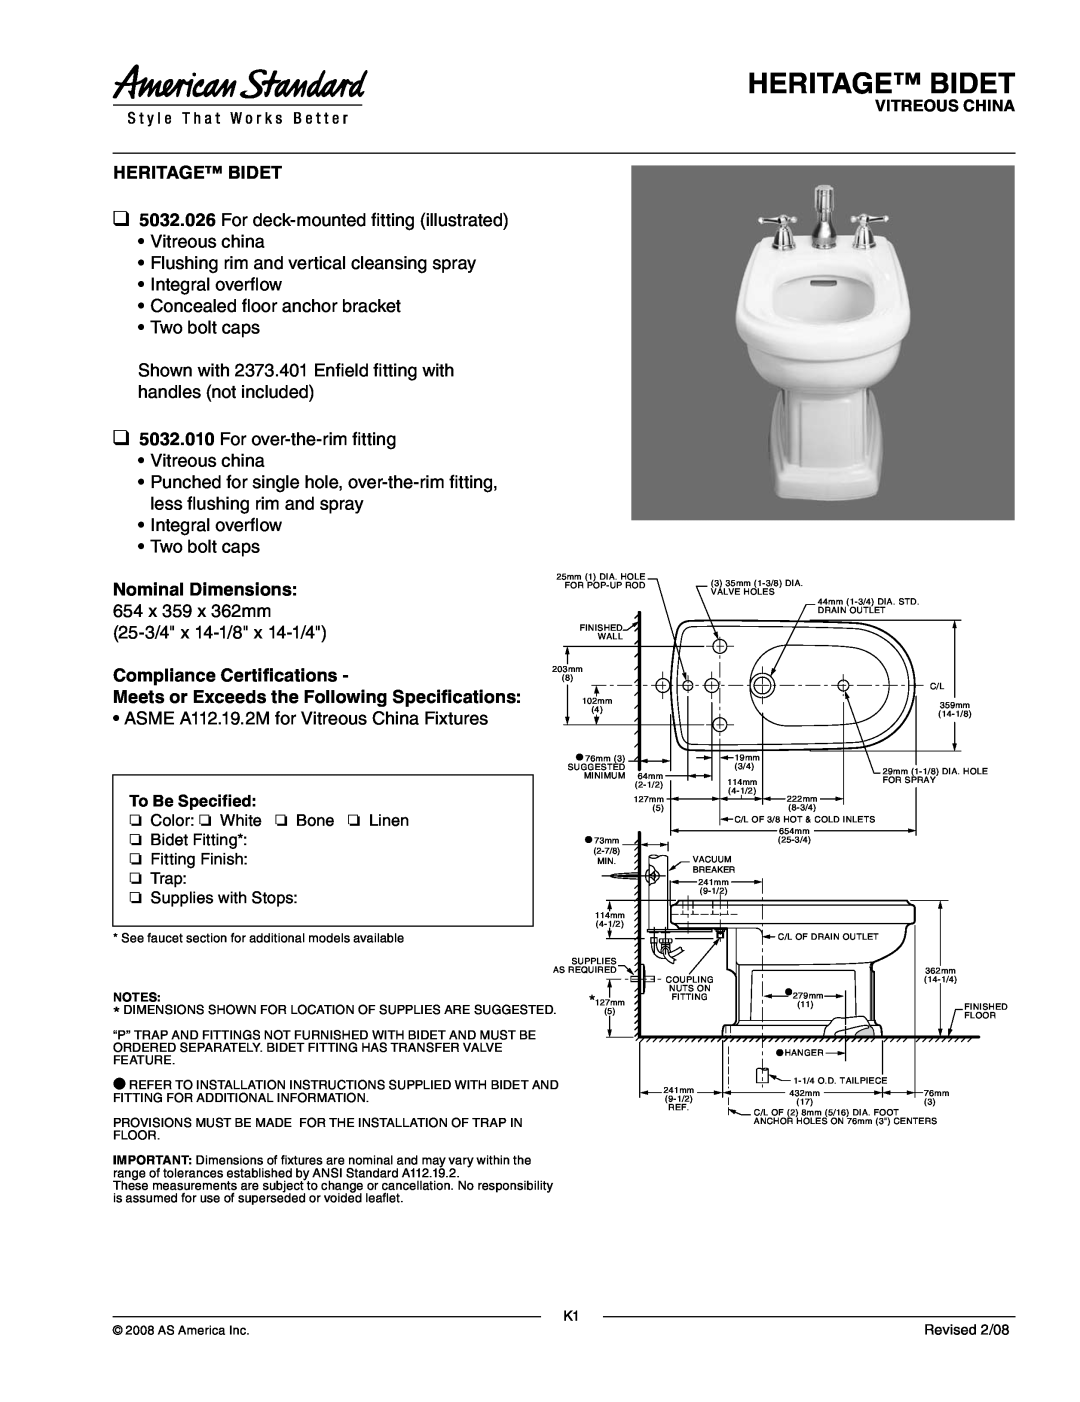 American Standard 5032.010, 5032.026 dimensions Heritage Bidet, Nominal Dimensions, Compliance Certifications 